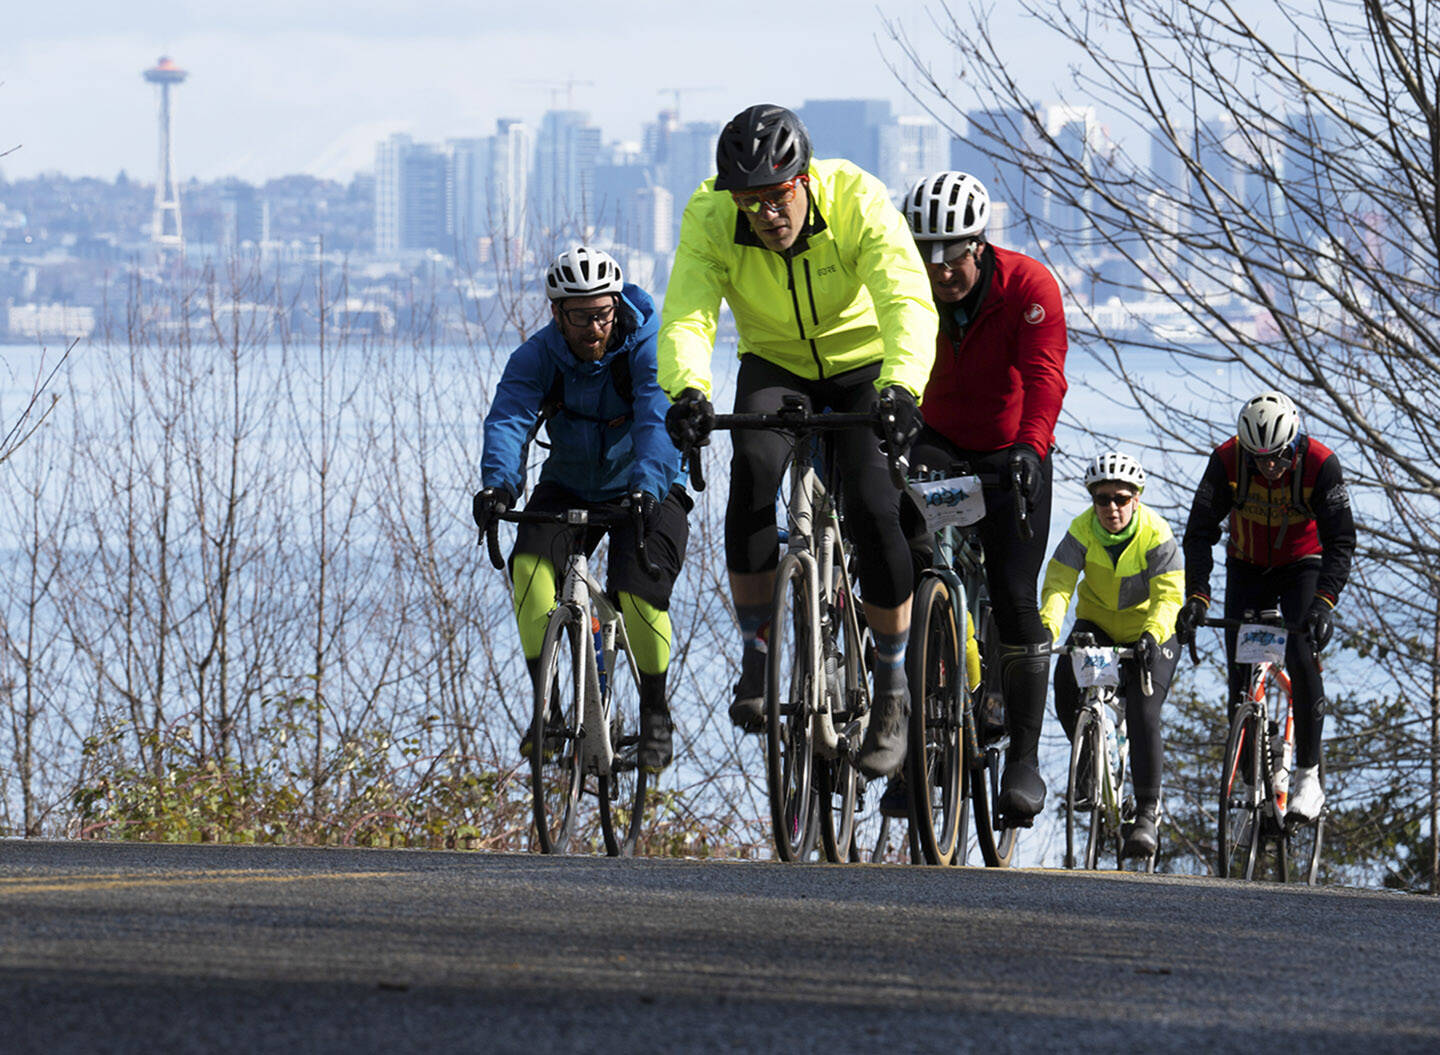 Bicyclists climb another Bainbridge Island hill with the Seattle Center and skyline in the background.
Bicyclists climb another Bainbridge Island hill with the Seattle Center and skyline in the background. Simon Hoke Courtesy Photo